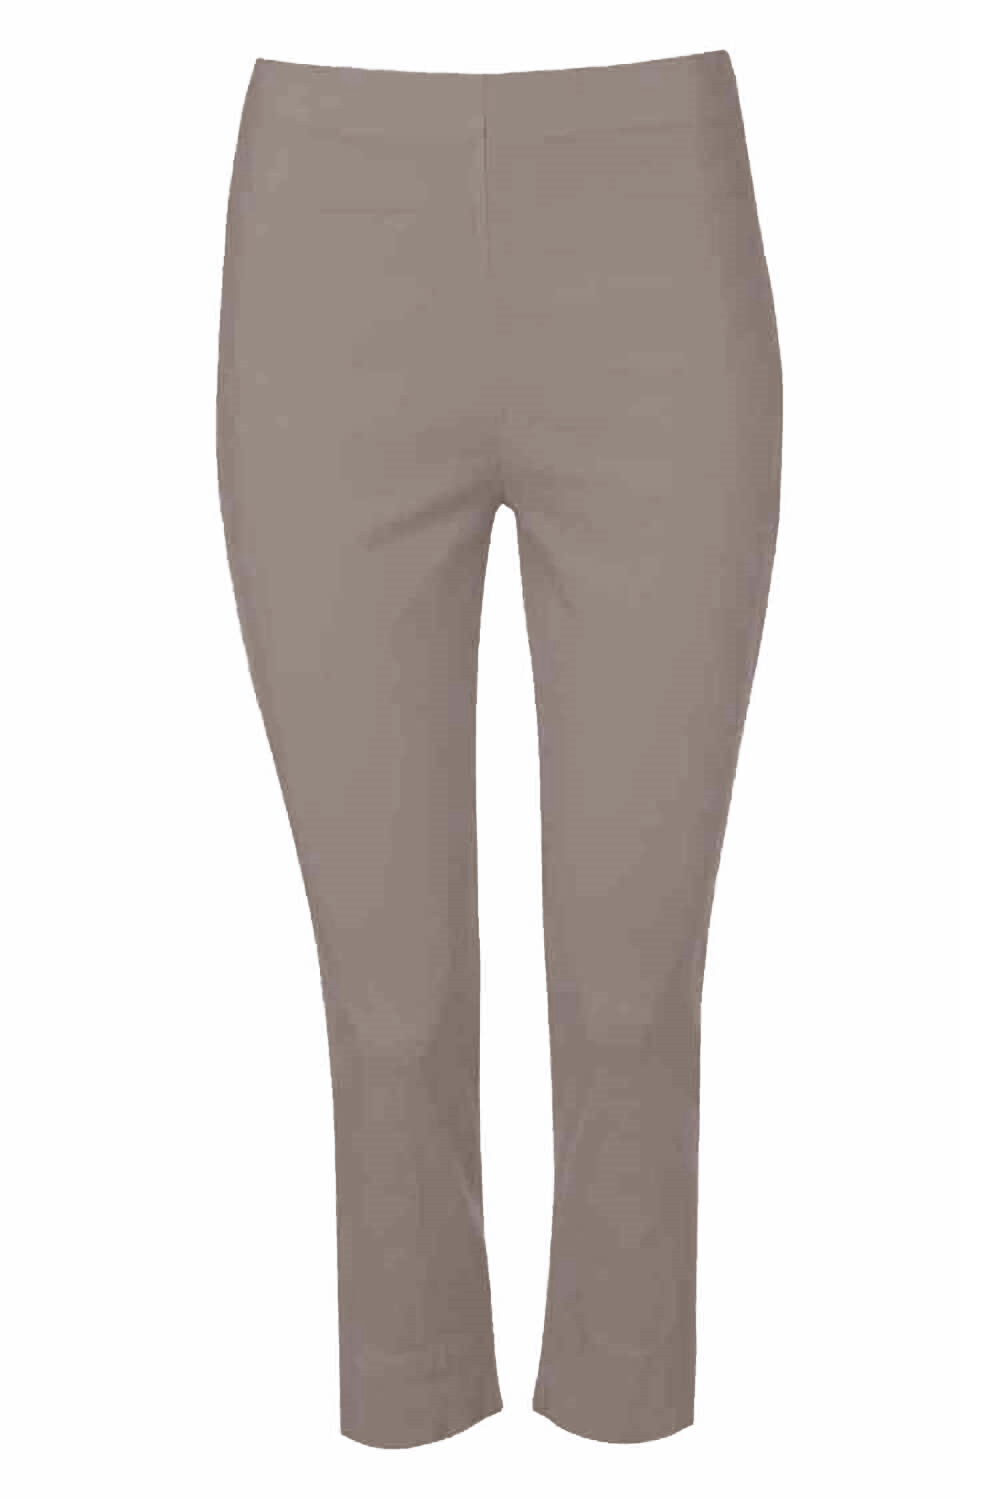 Chocolate Cropped Stretch Trouser, Image 4 of 4